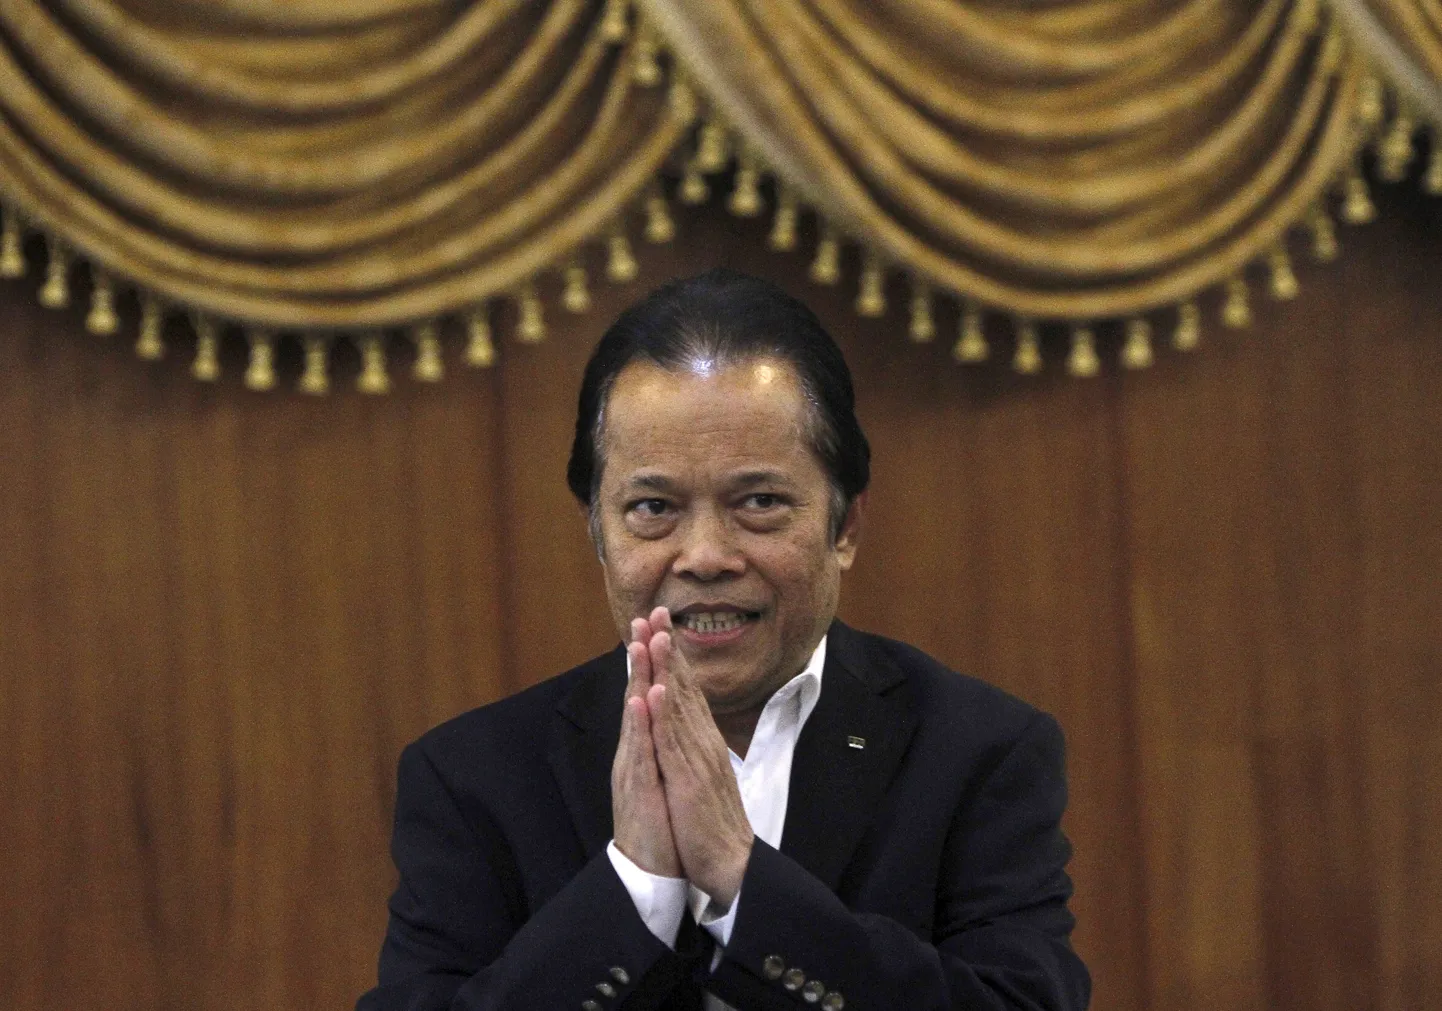 Then Football Association of Thailand (FAT) President Worawi Makudi gestures after a news conference at the association office in Bangkok in this September 19, 2012 file photo. Former FIFA executive committee member Worawi has been suspended for 90 days pending a full investigation, the Ethics Committee of soccer's governing body said on October 12, 2015.   REUTERS/Chaiwat Subprasom/Files